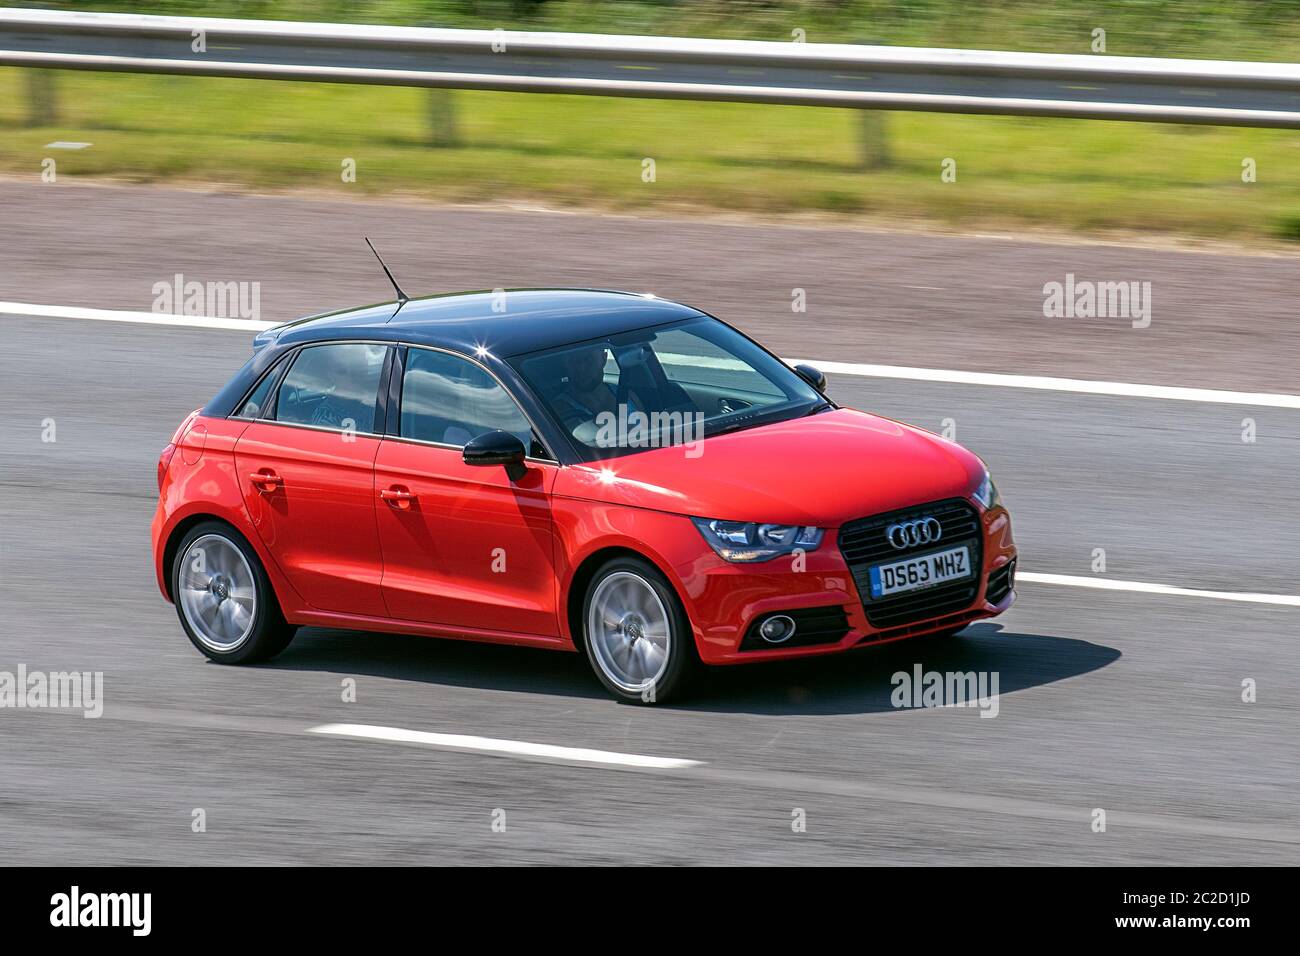 a1 sport tfsi stock photography and images - Alamy